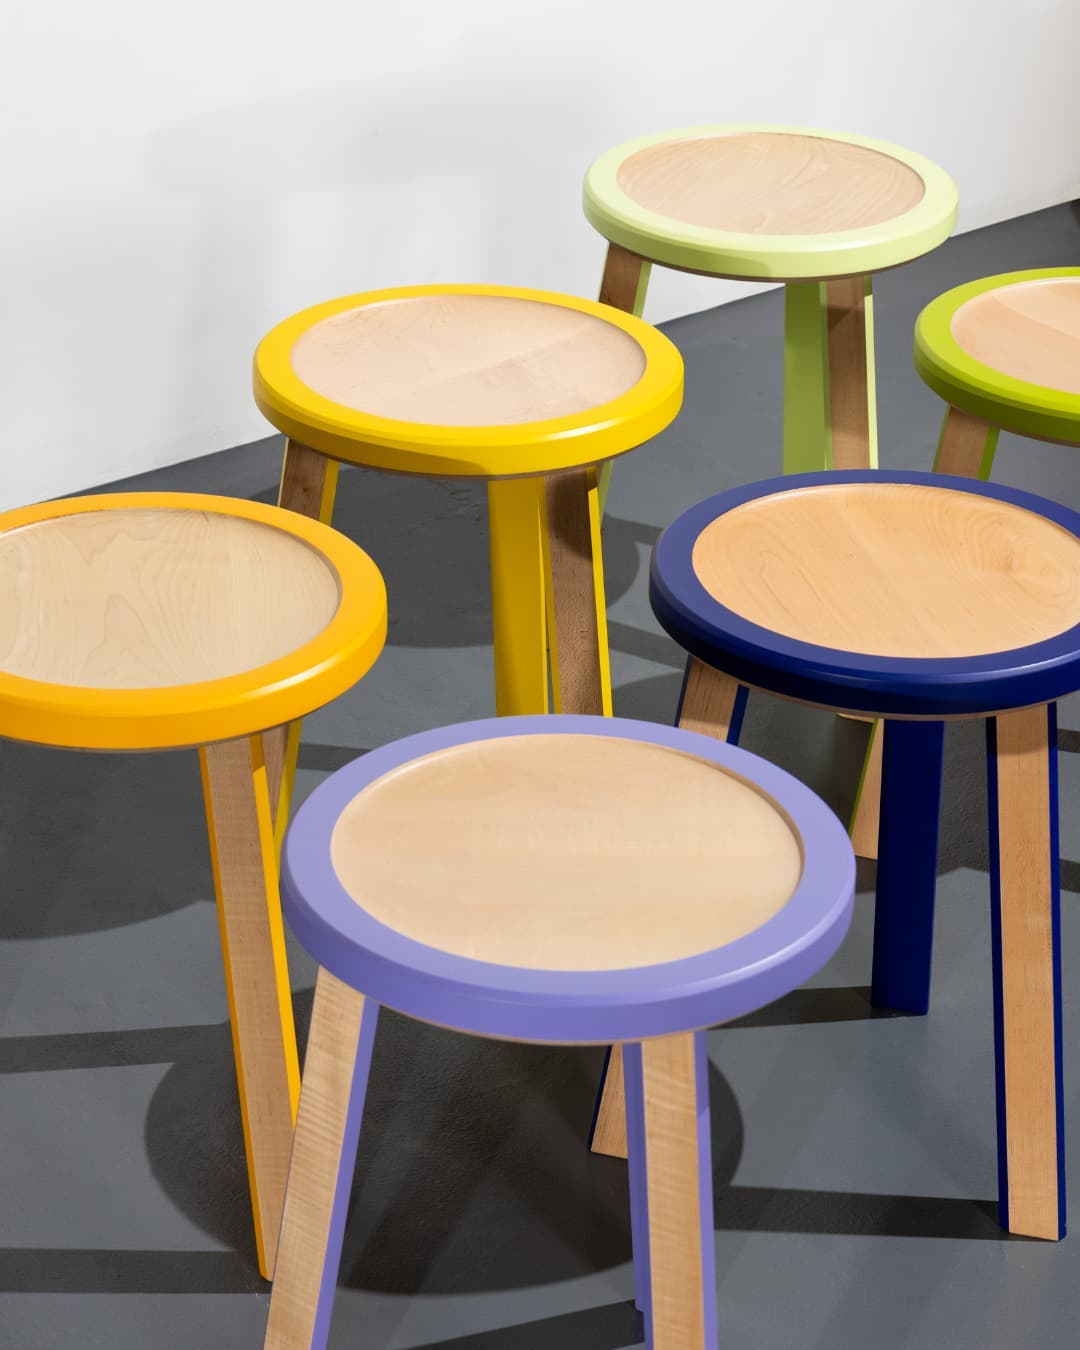 A collection of chair height (19") Trio Stools. They also make great little side tables. 
#stool #seat #chair #sidetable #furniture #woodworking #modern #design #color #craft #decor #interiors #interiordesign #styleinspo #homeinspo #designinspo #designideas